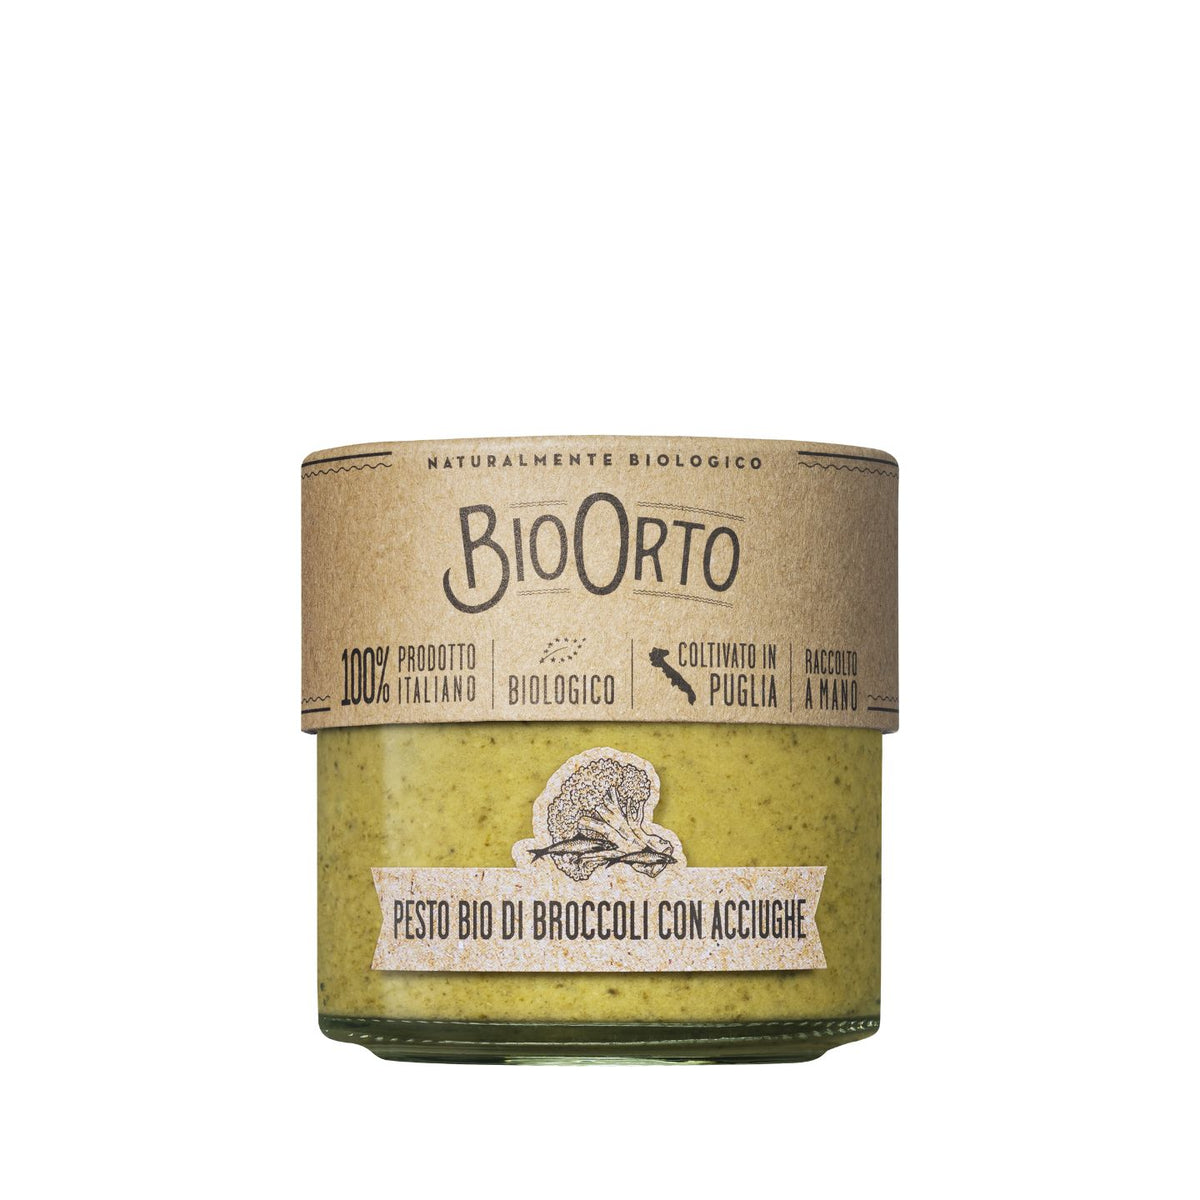 Bio Orto Organic Broccoli Pesto with Anchovies 180g  | Imported and distributed in the UK by Just Gourmet Foods